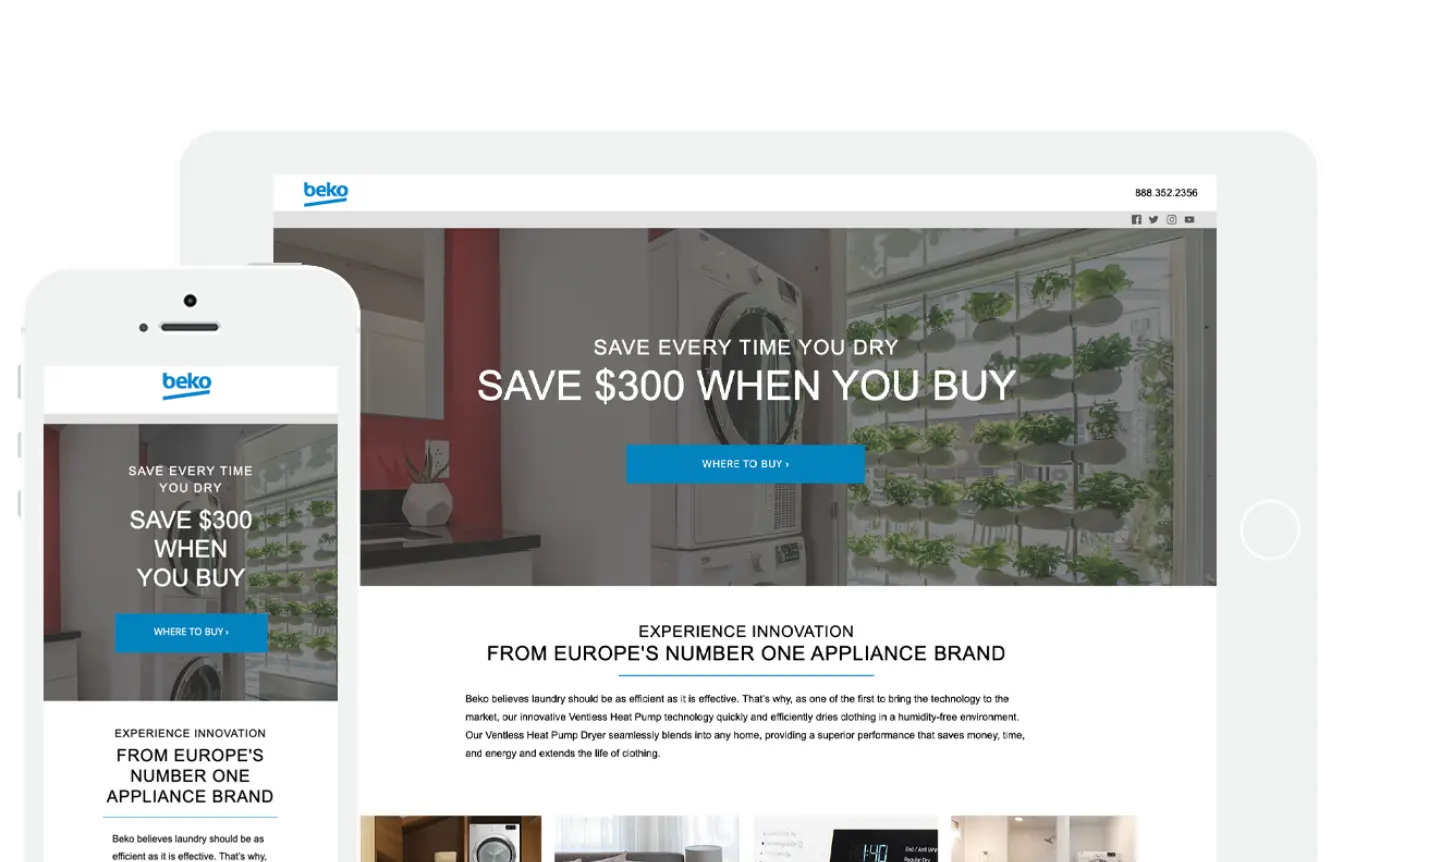 Online savings promotion we created for Beko appliances displayed on tablet and mobile phone.